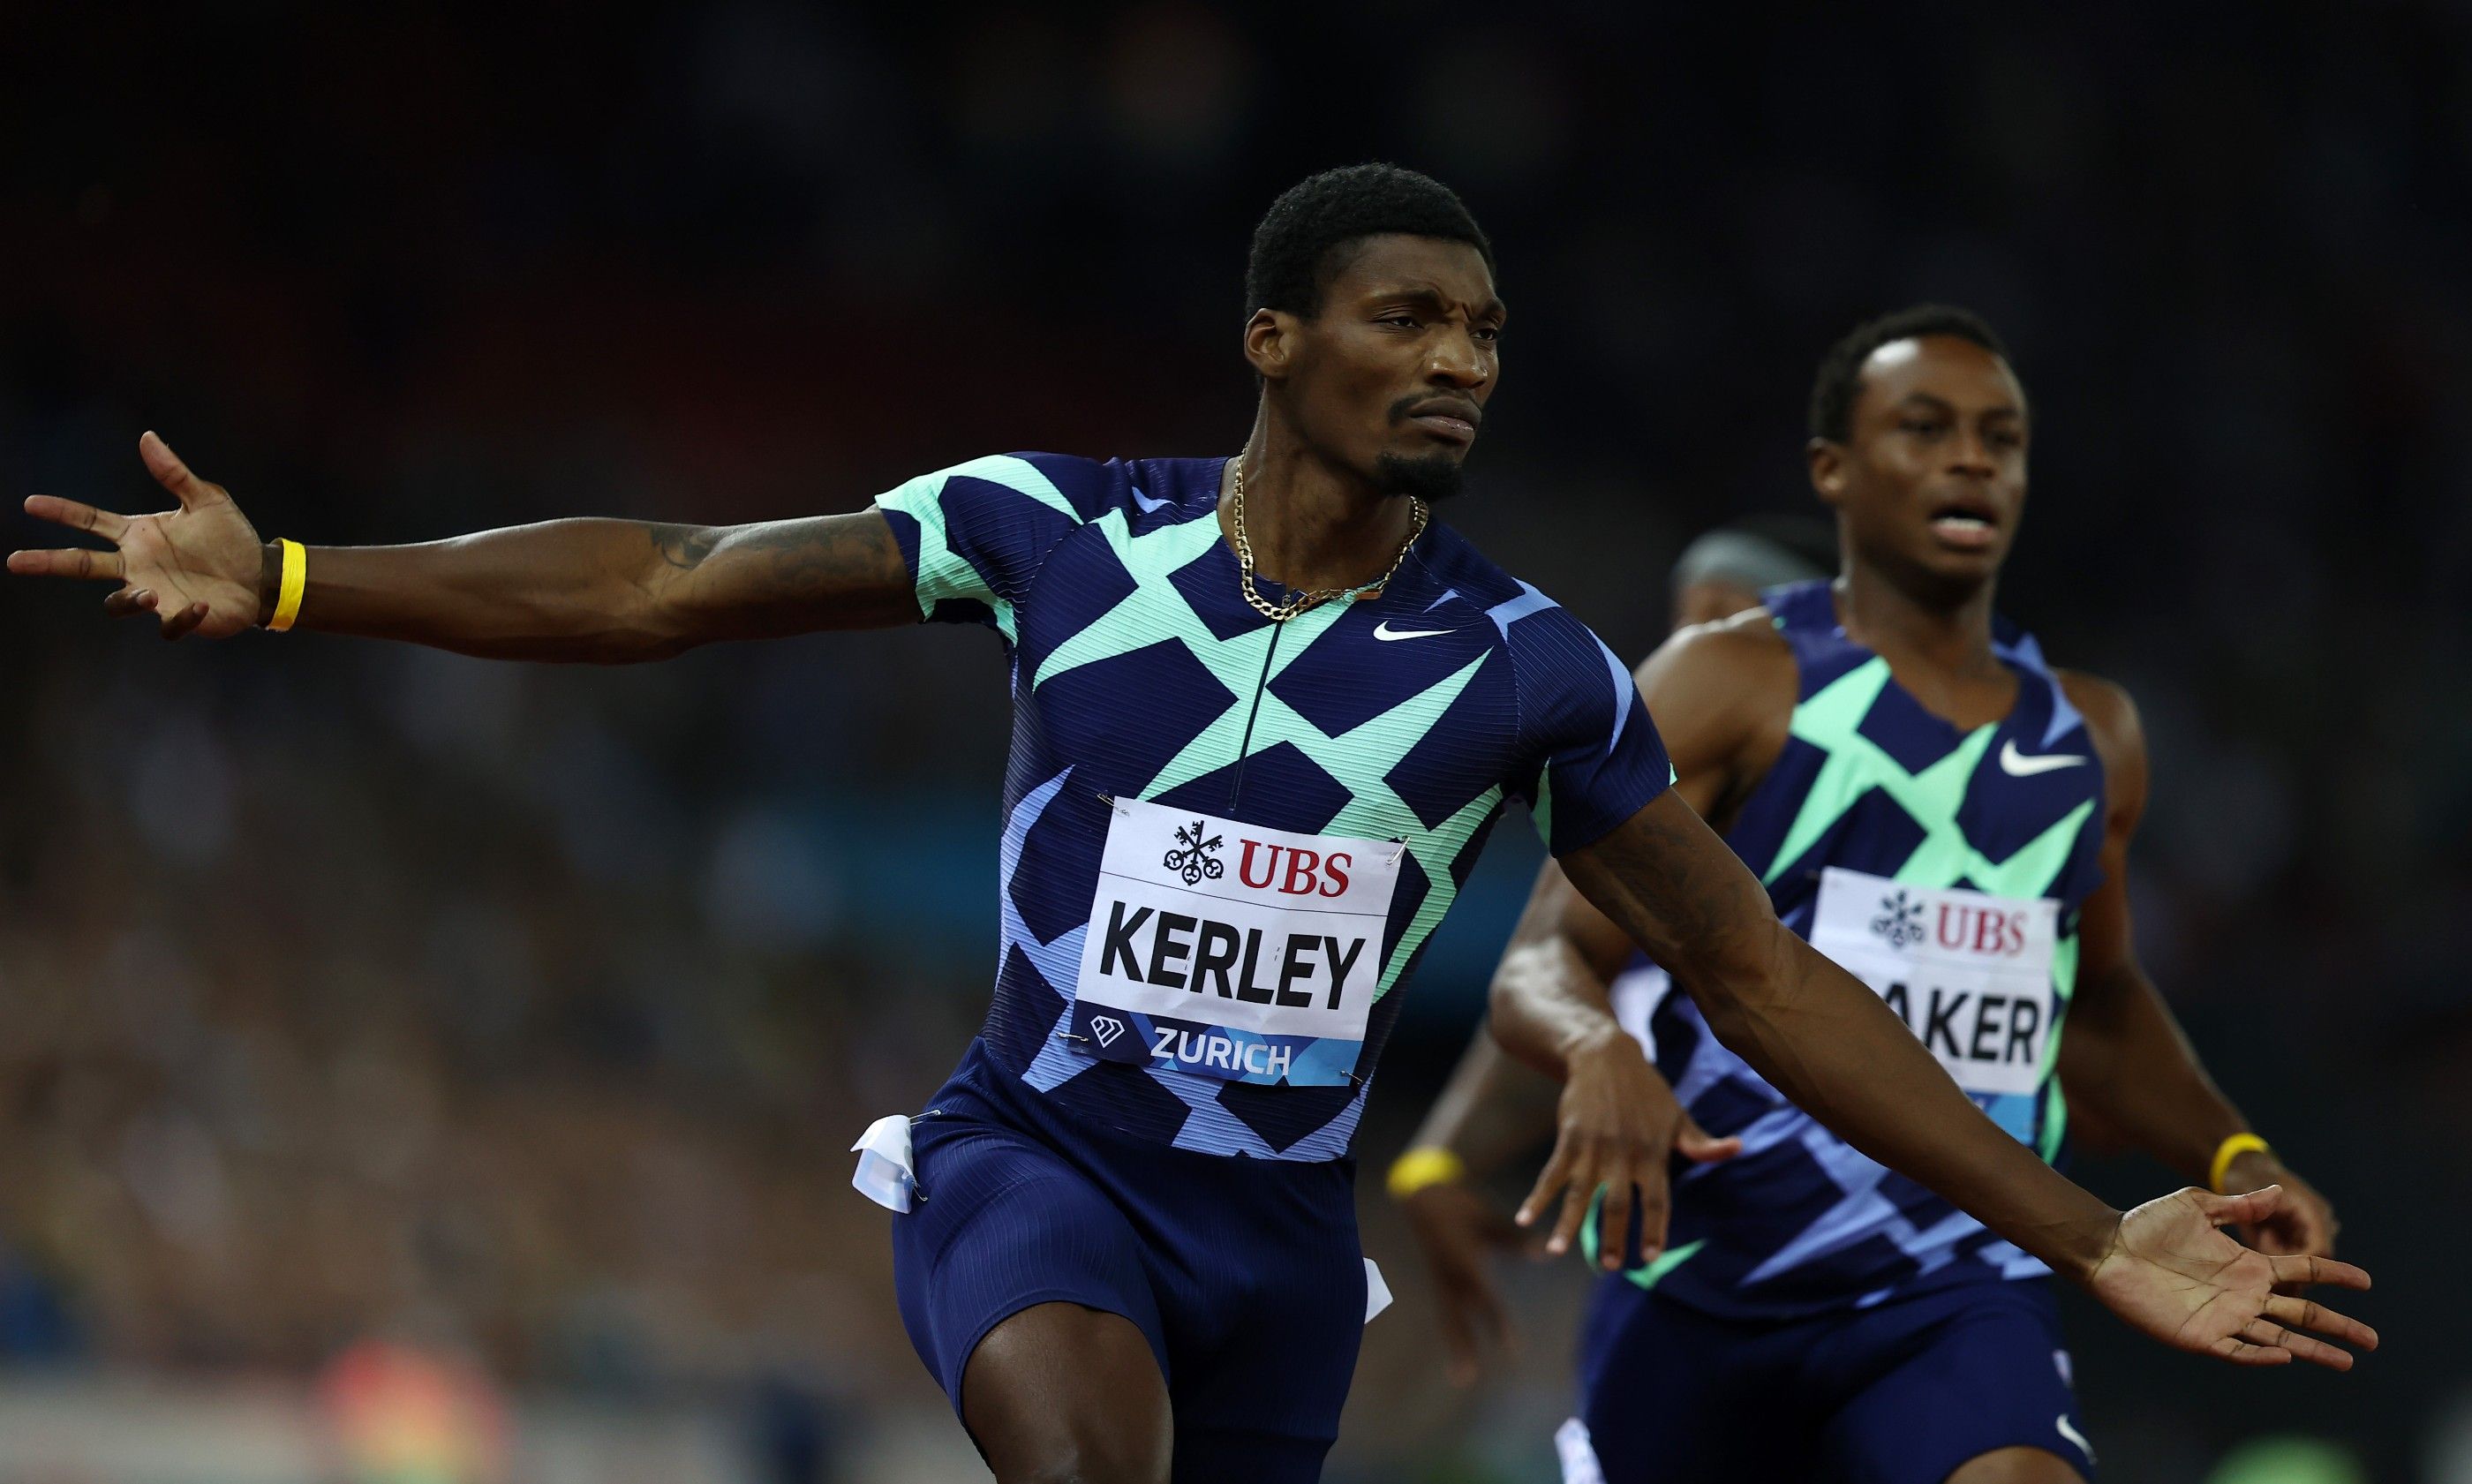 Fred Kerley wins the 100m at the Wanda Diamond League final in Zurich